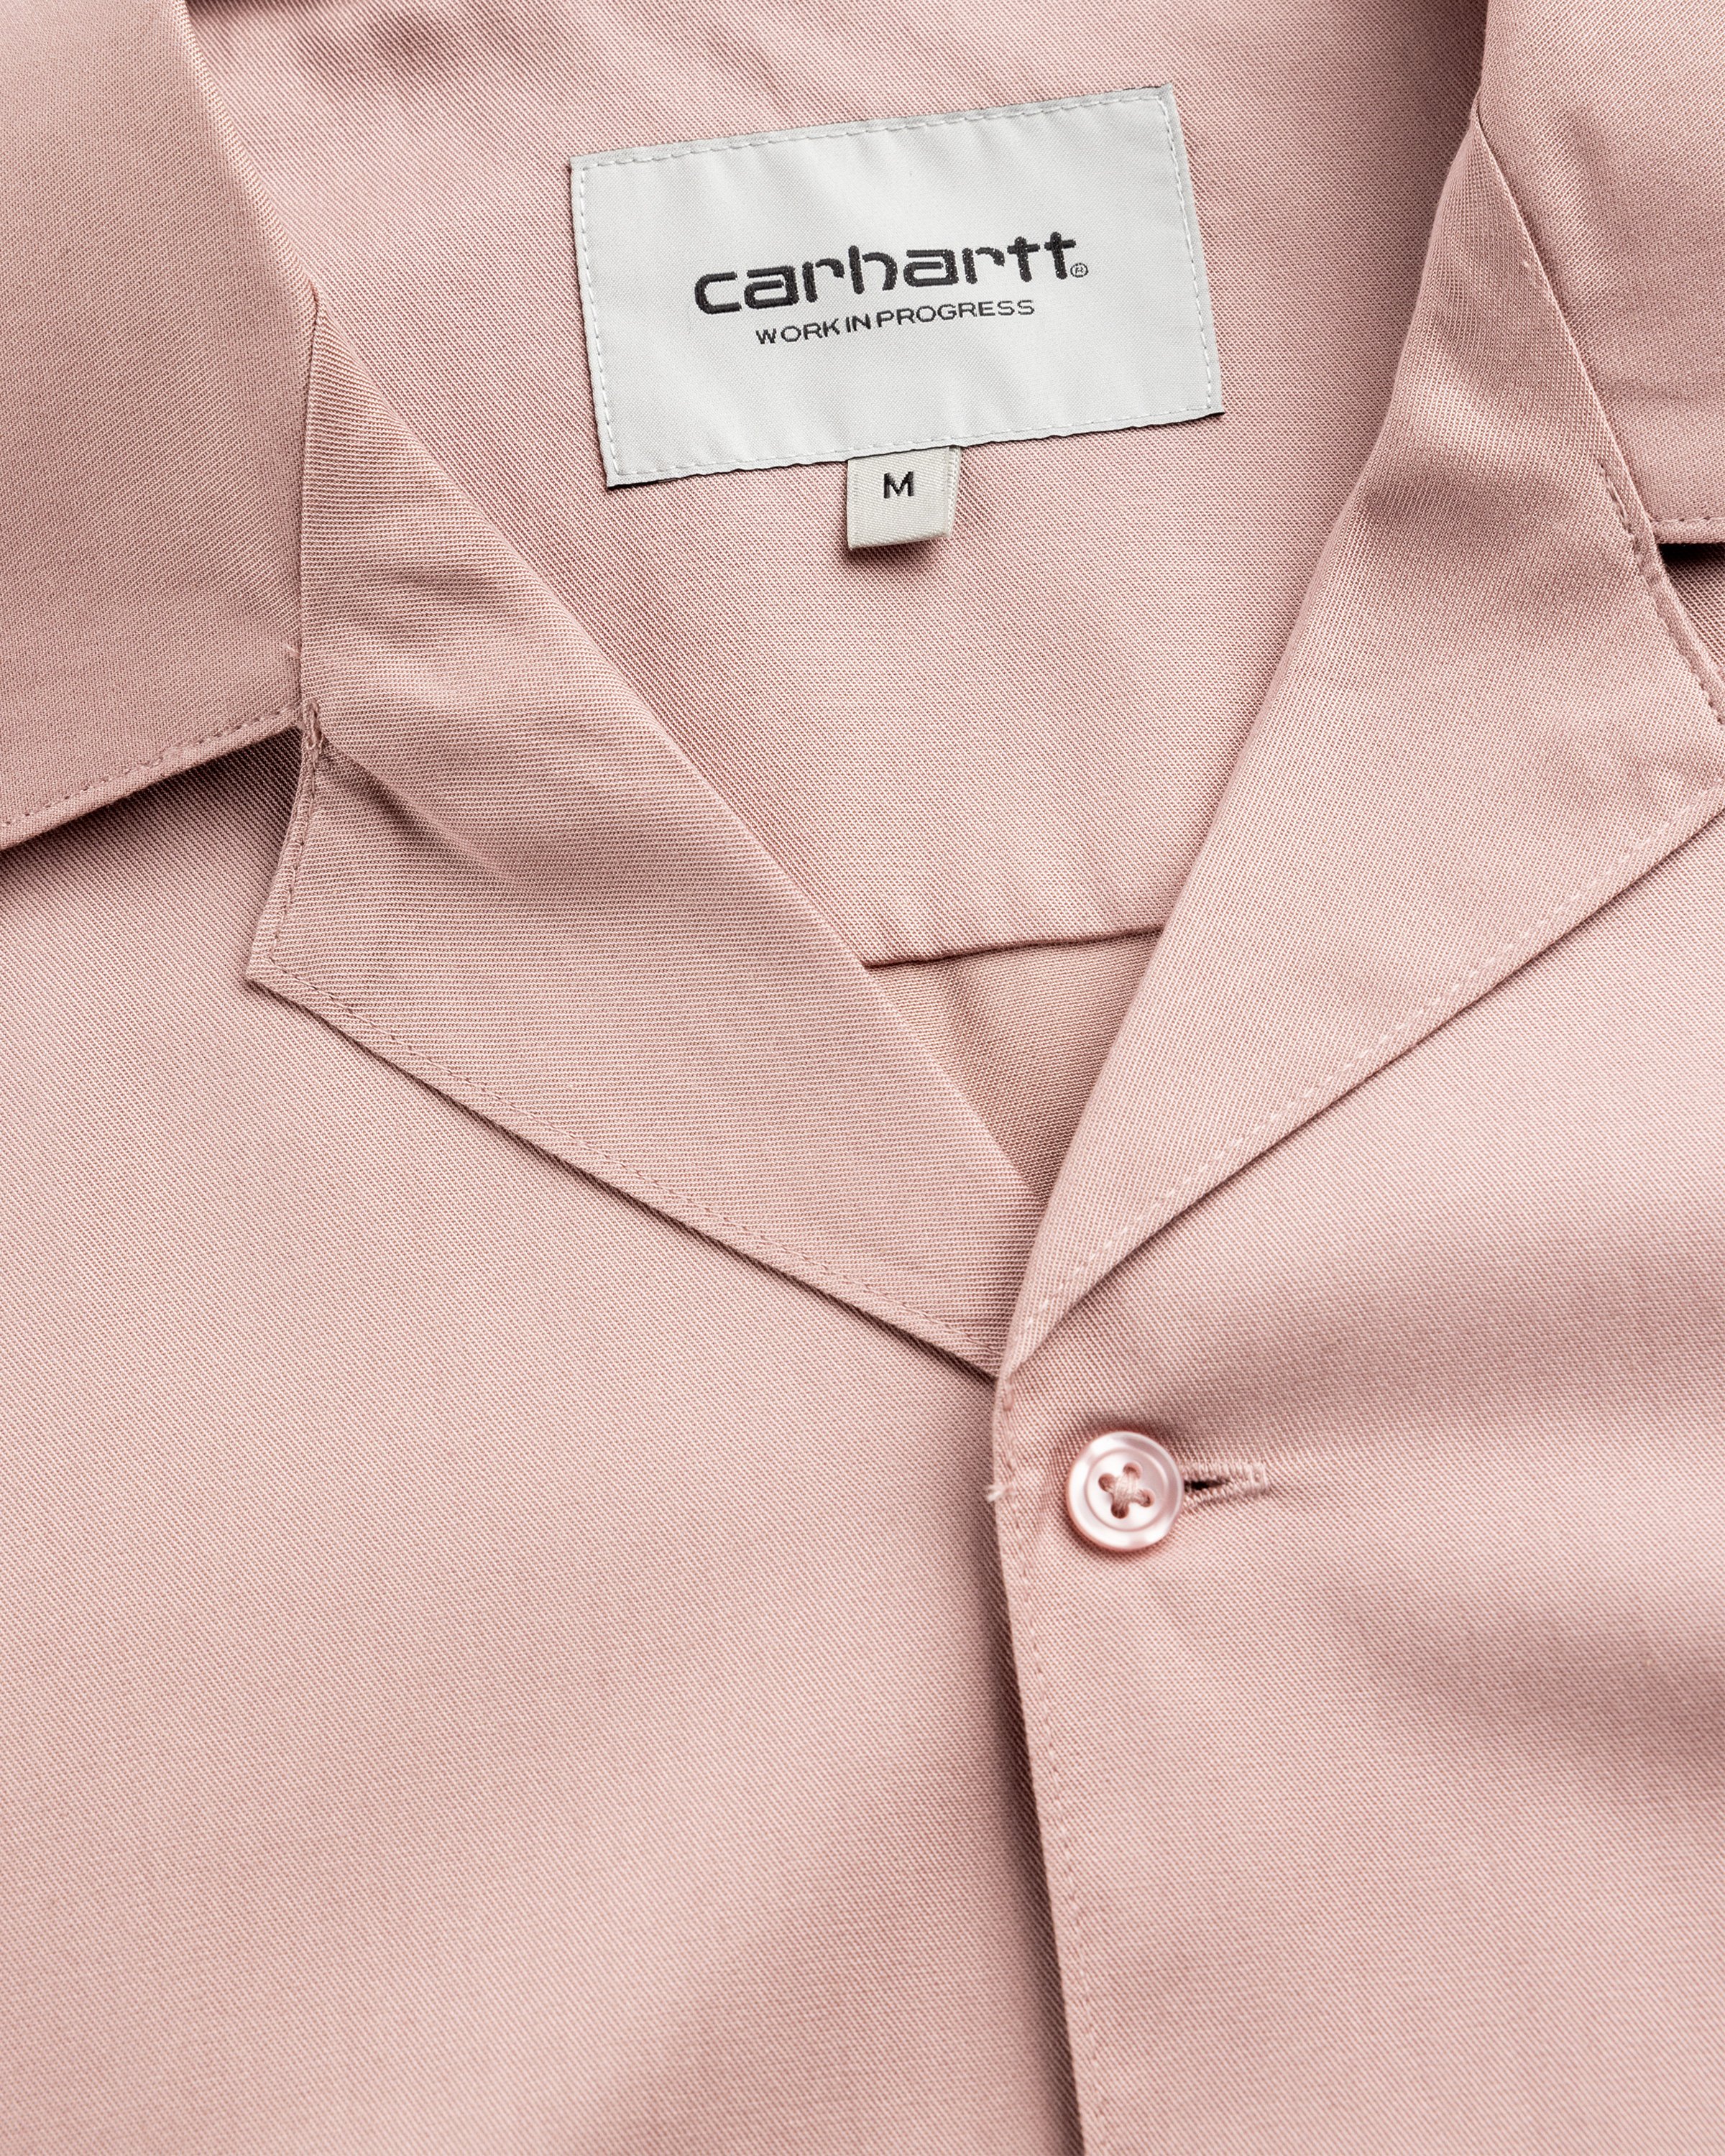 Carhartt WIP - S/S Delray Shirt Glassy Pink / Black - Clothing - Pink - Image 7